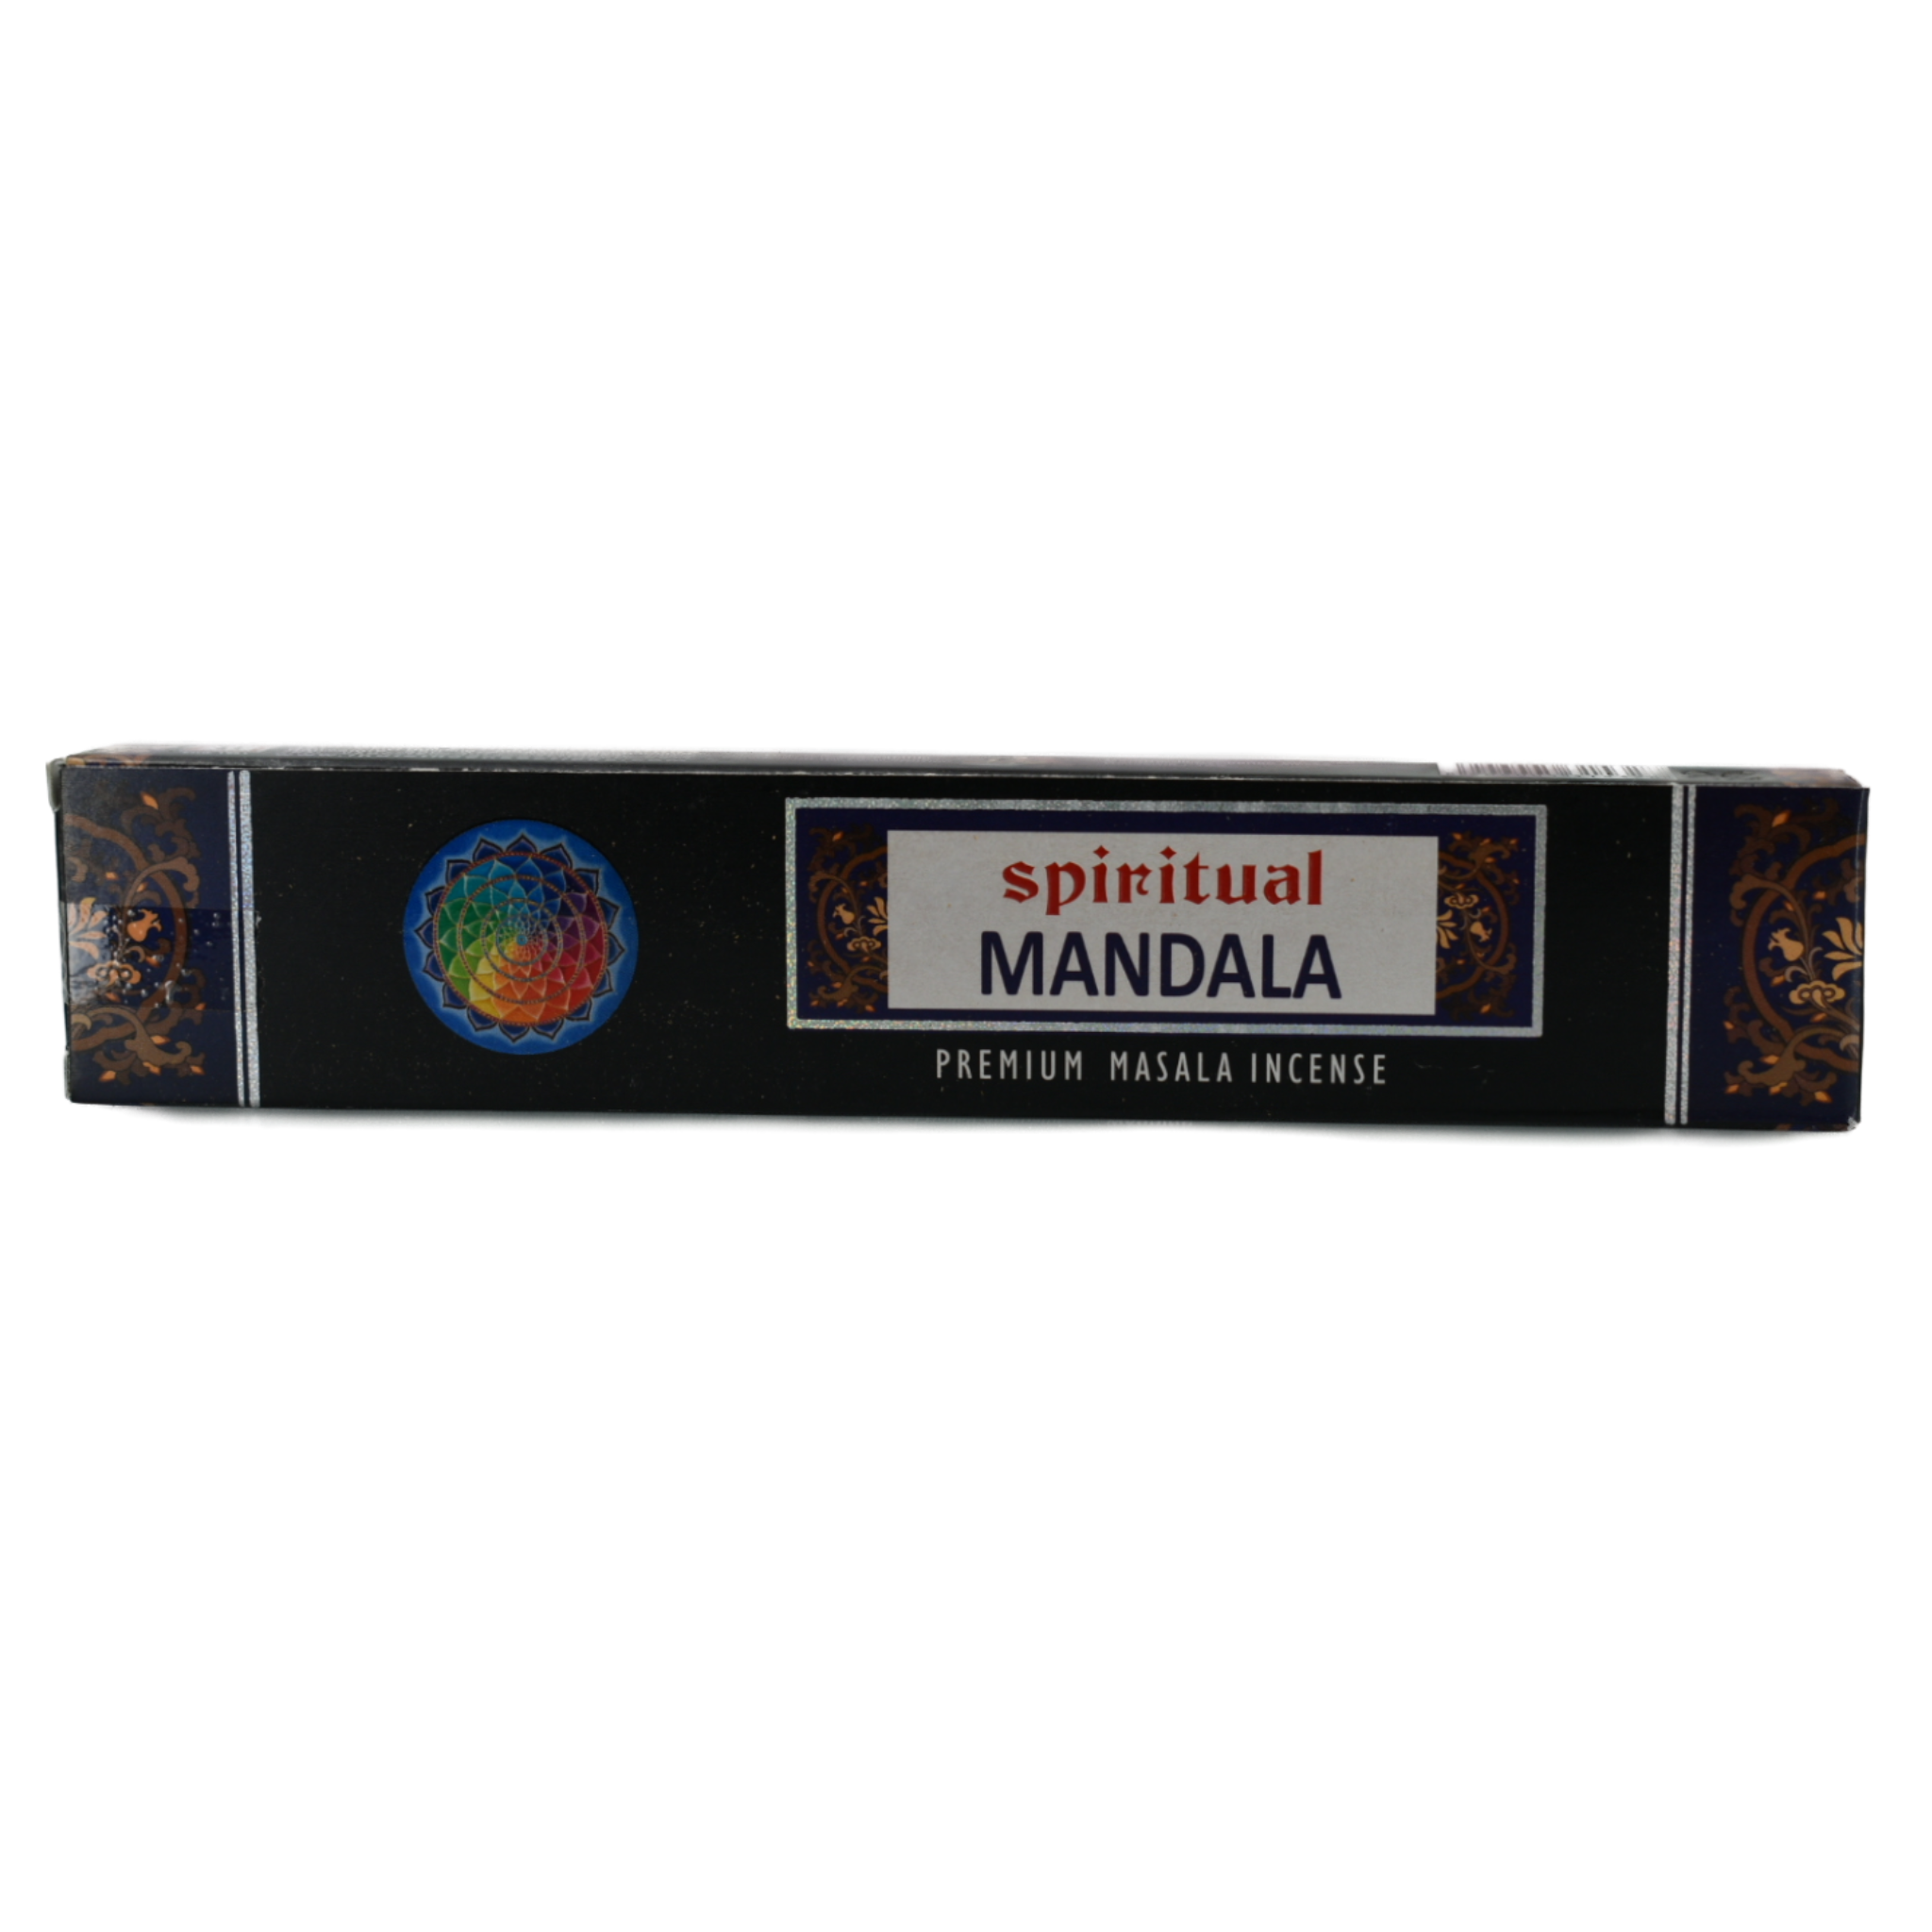 Spiritual Mandala Incense Sticks back cover. is the same picture as the front.  Spiritual Incense is enriched with natural essential oils to bring happiness, reduce stress and create a relaxed mood.  These incense sticks are created with care and skill that make each one simply matchless.  Get the positive energy flowing for that feel good experience.  